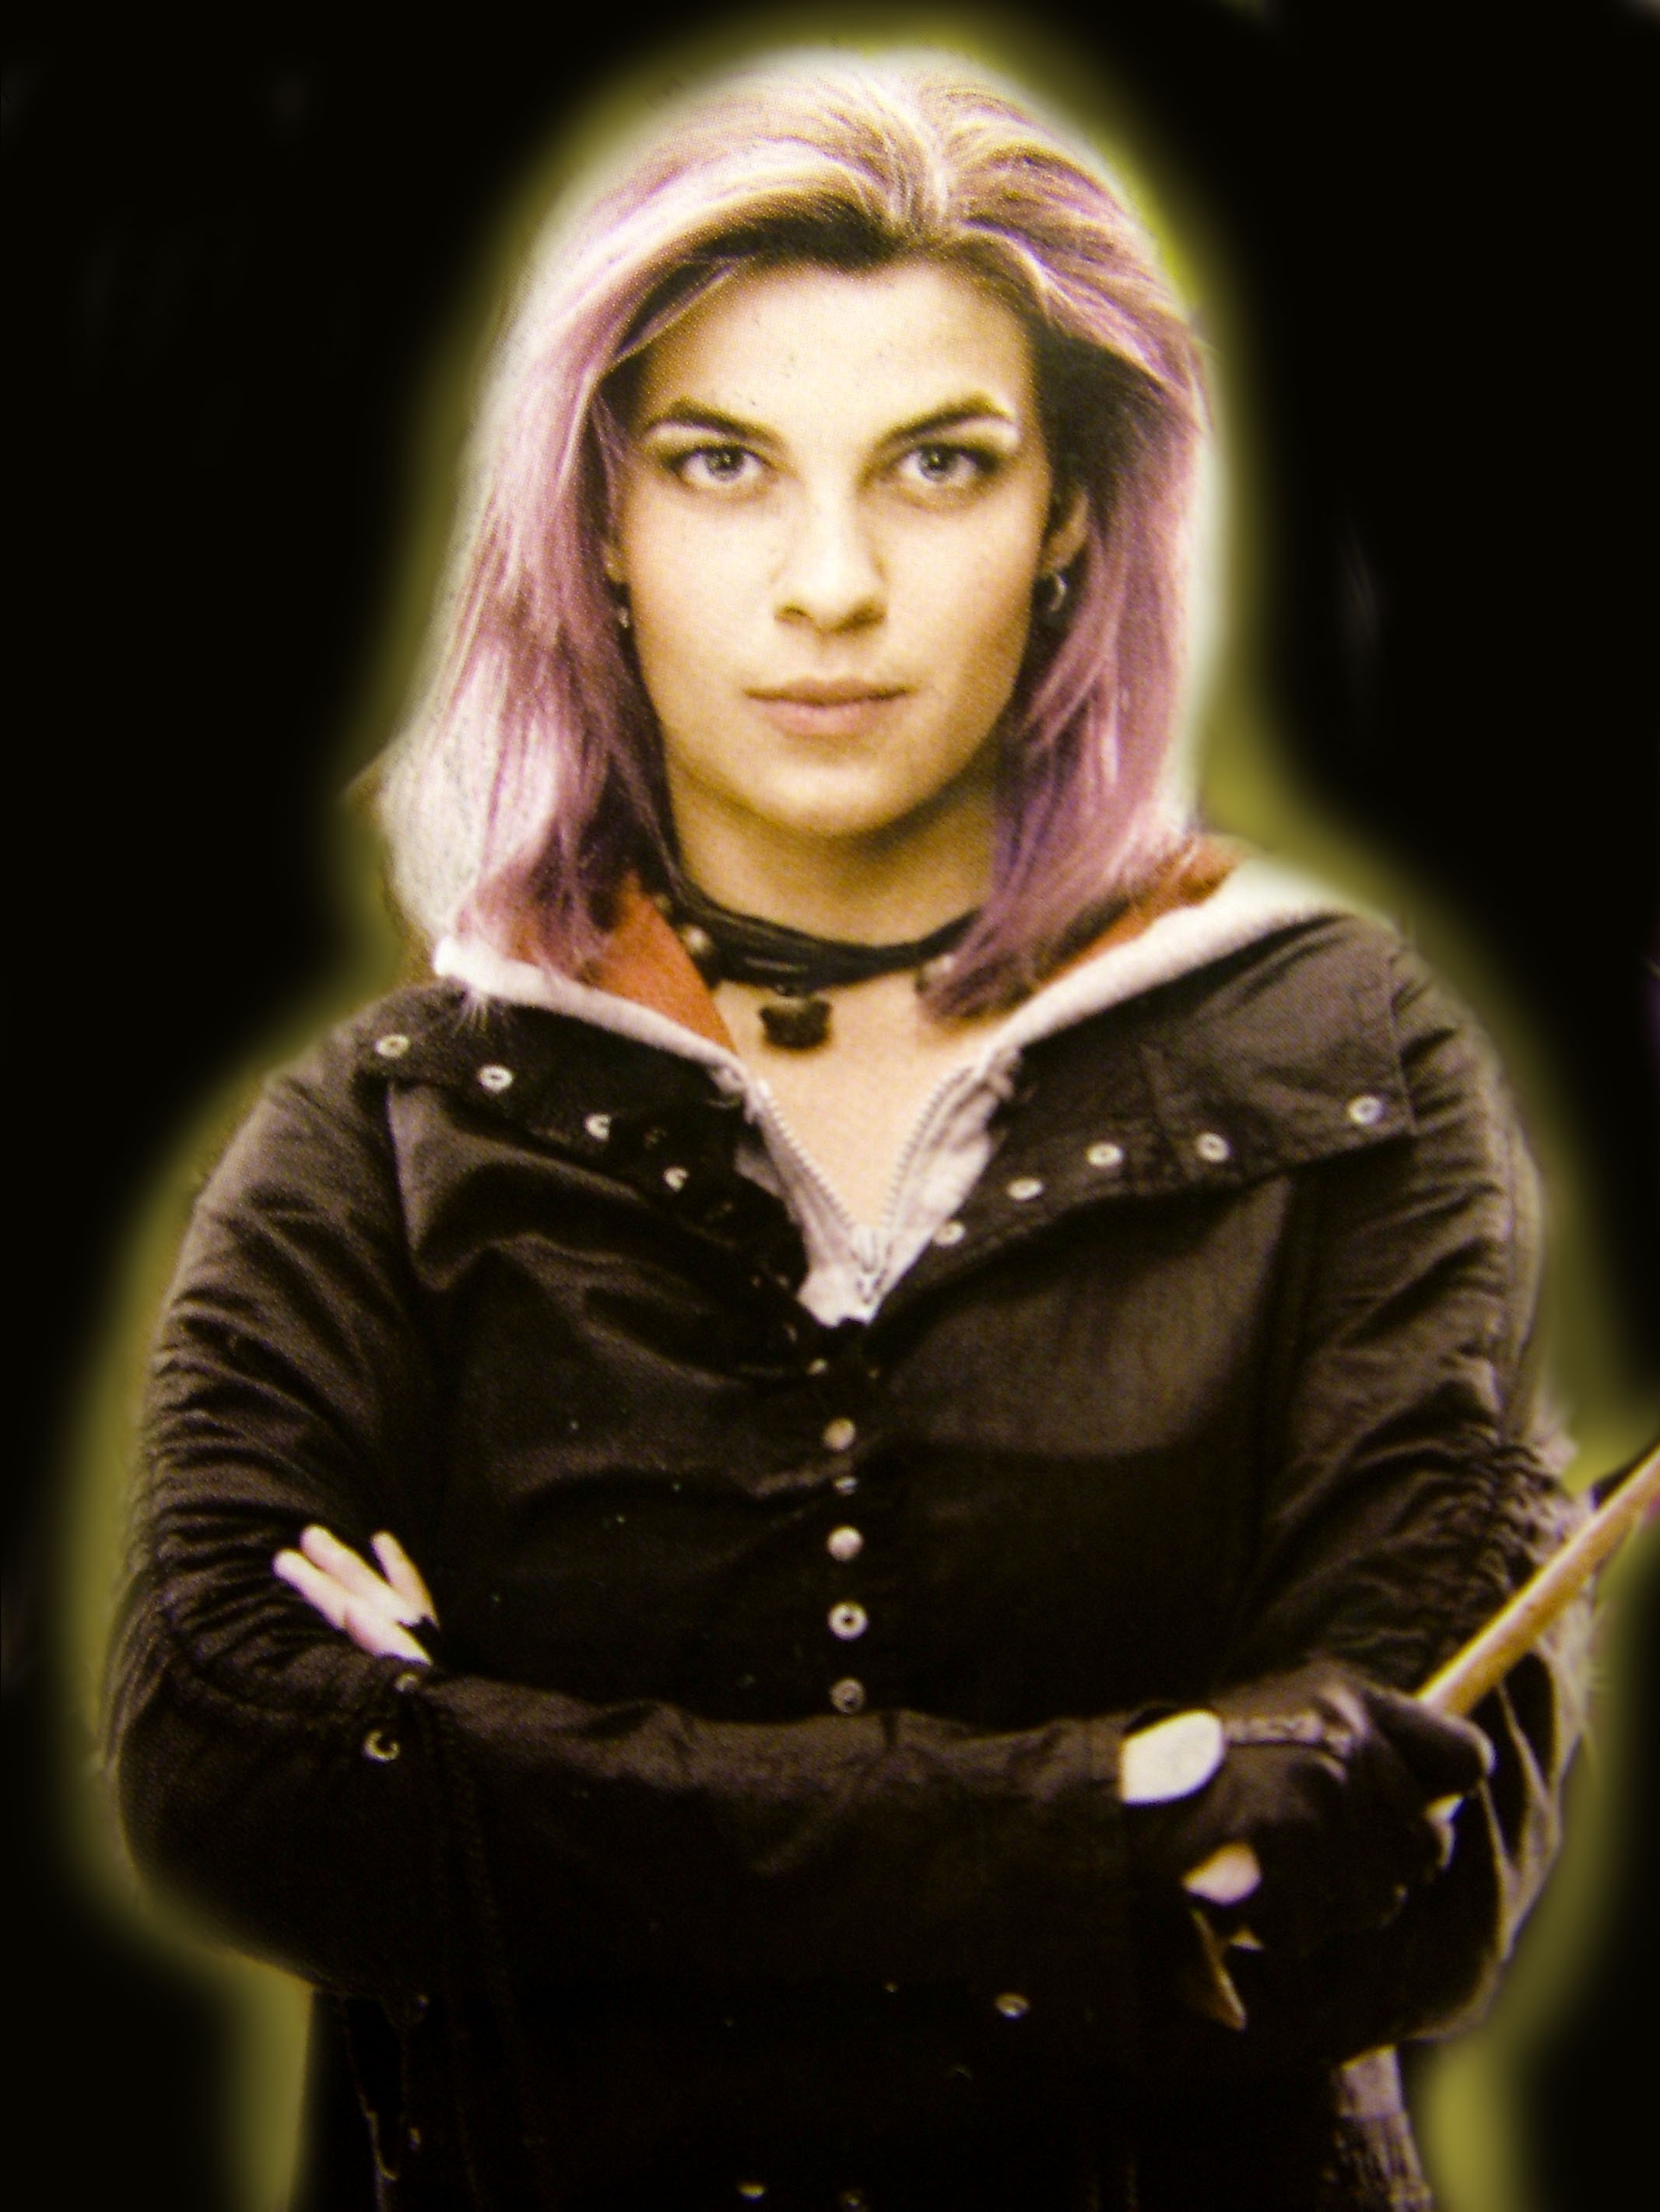 Does Tonks From Harry Potter Die